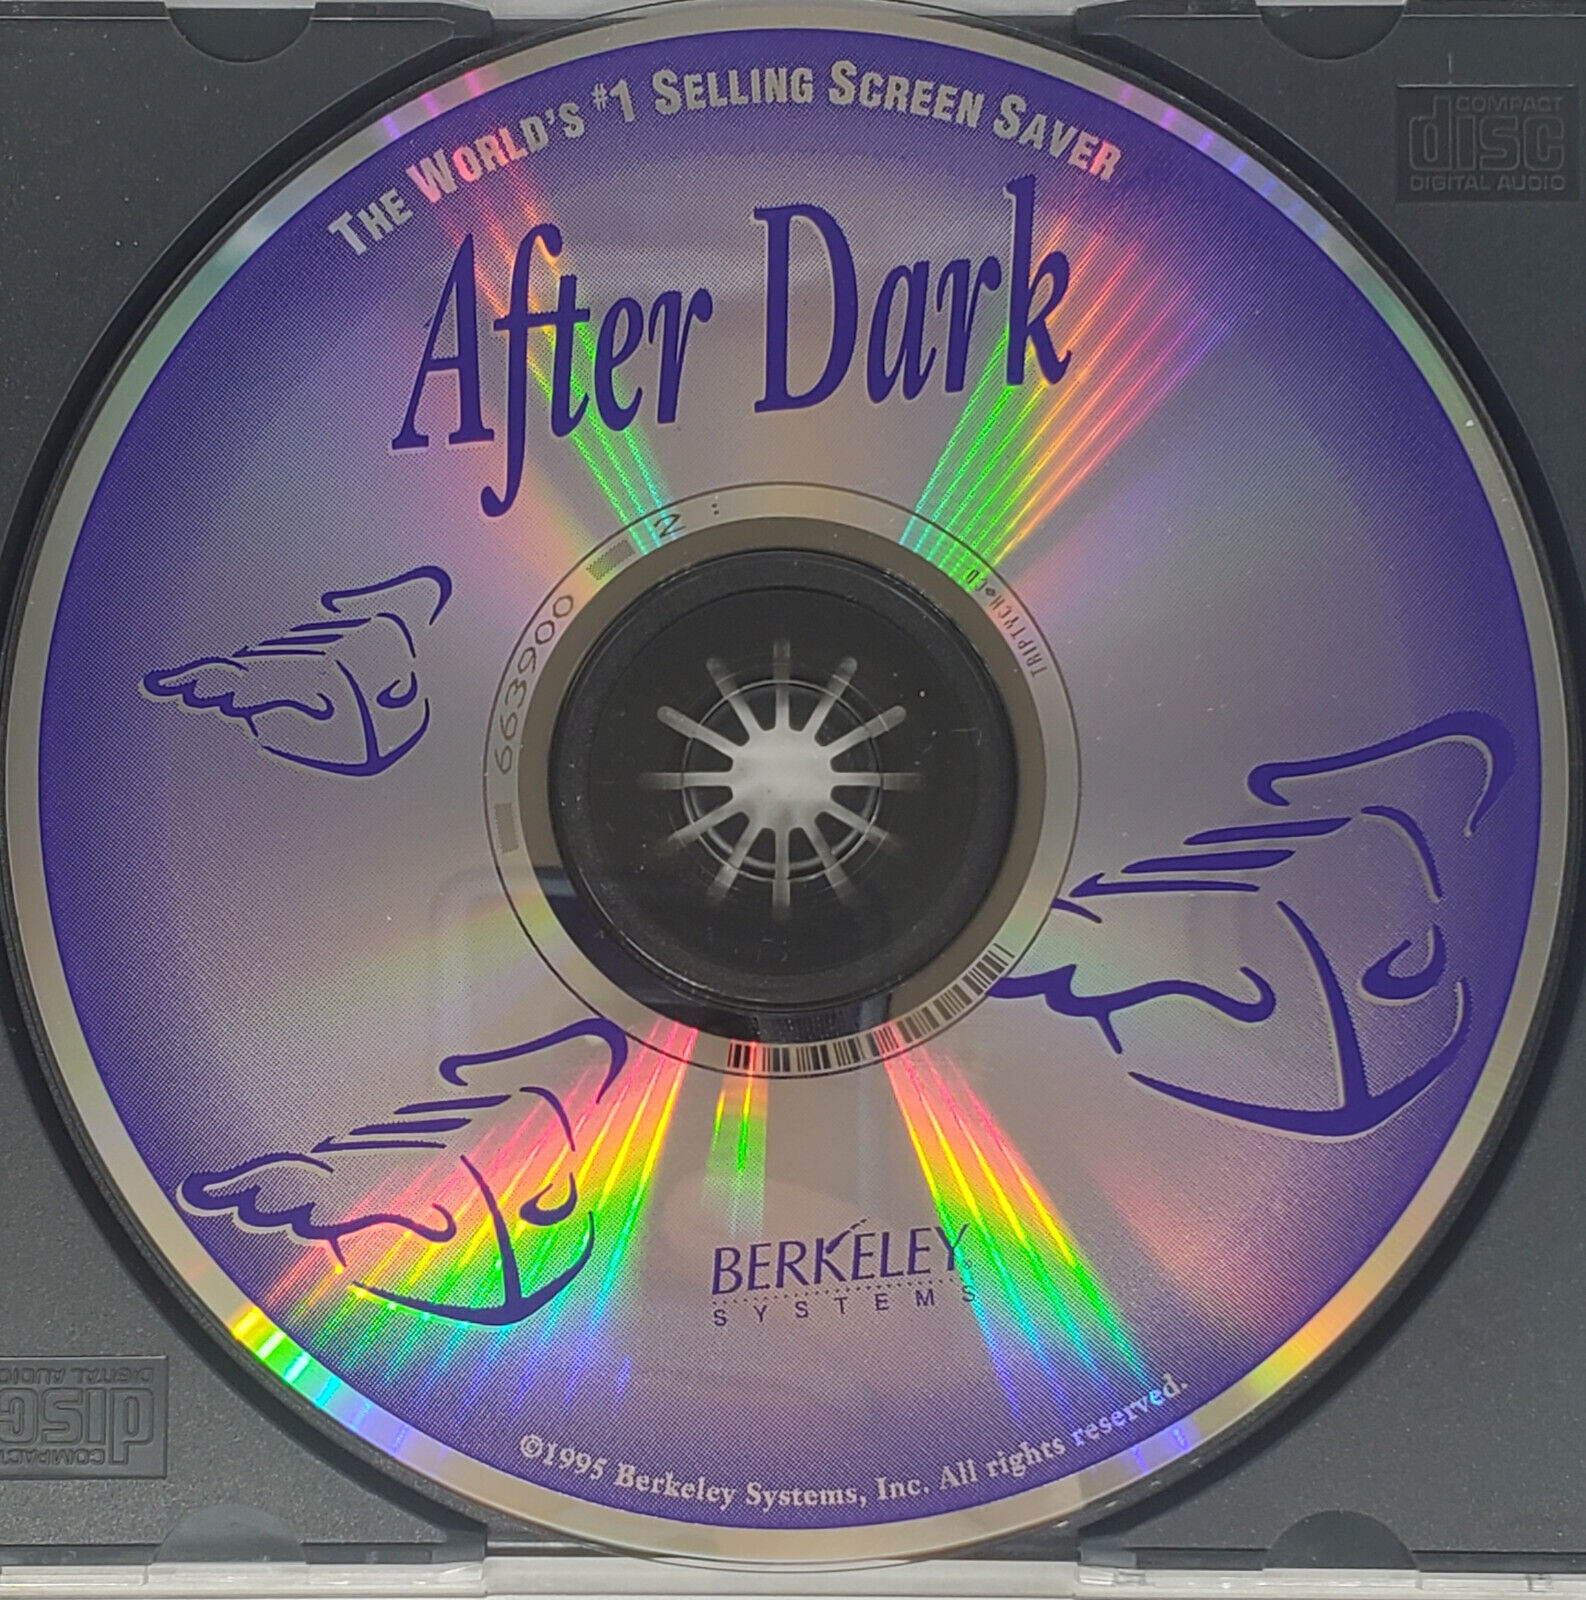 VTG After Dark 3.2 Screen Saver PC CD Win 3.x - 1995 Berkeley Systems - Tested